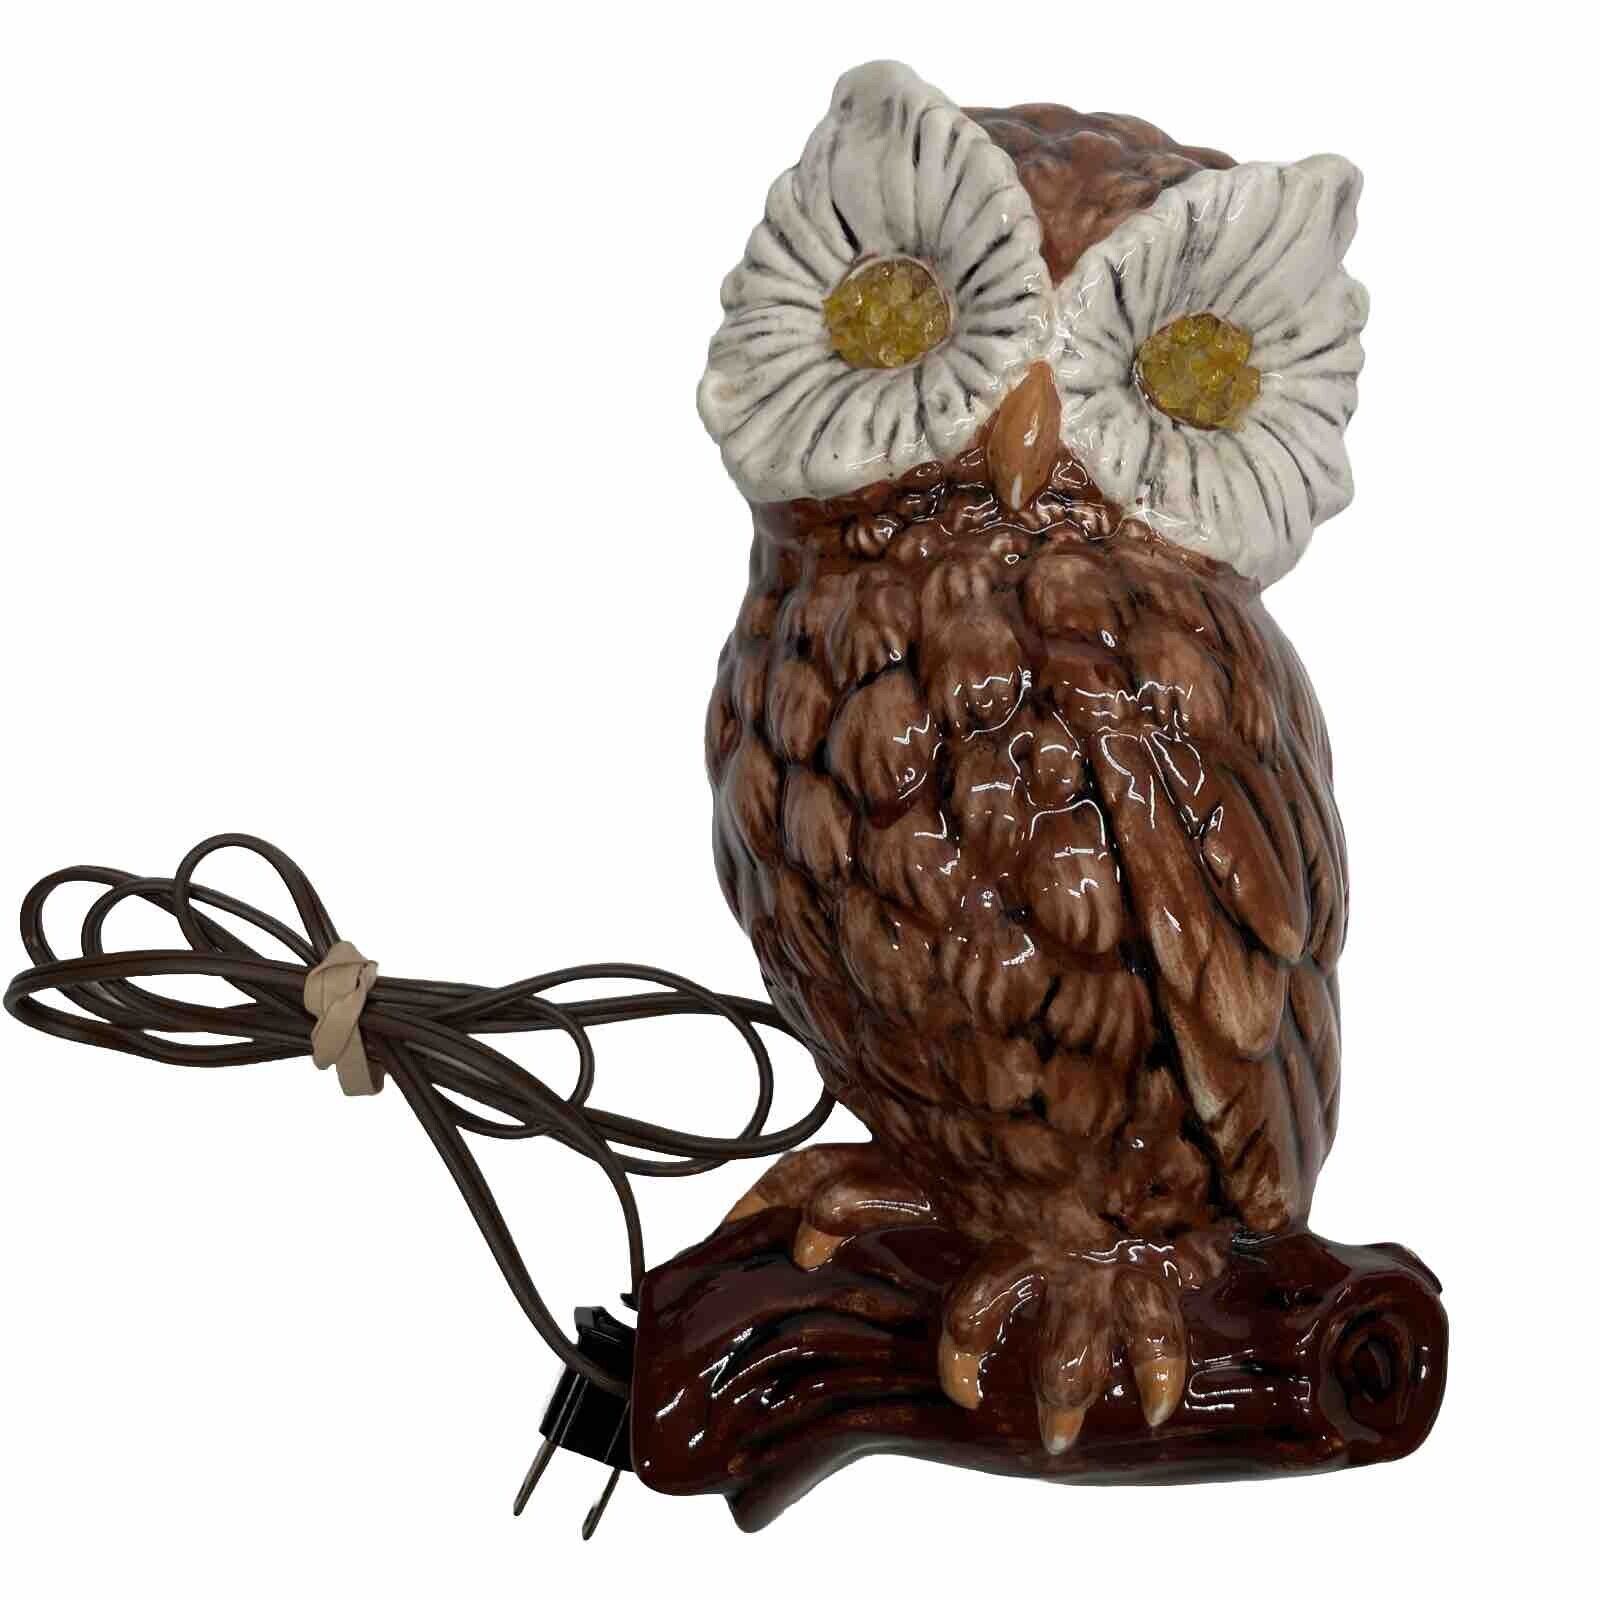 Vintage Owl Lamp Light 1970’s Ceramic Hand Painted Wall Hanging Pottery Handmade